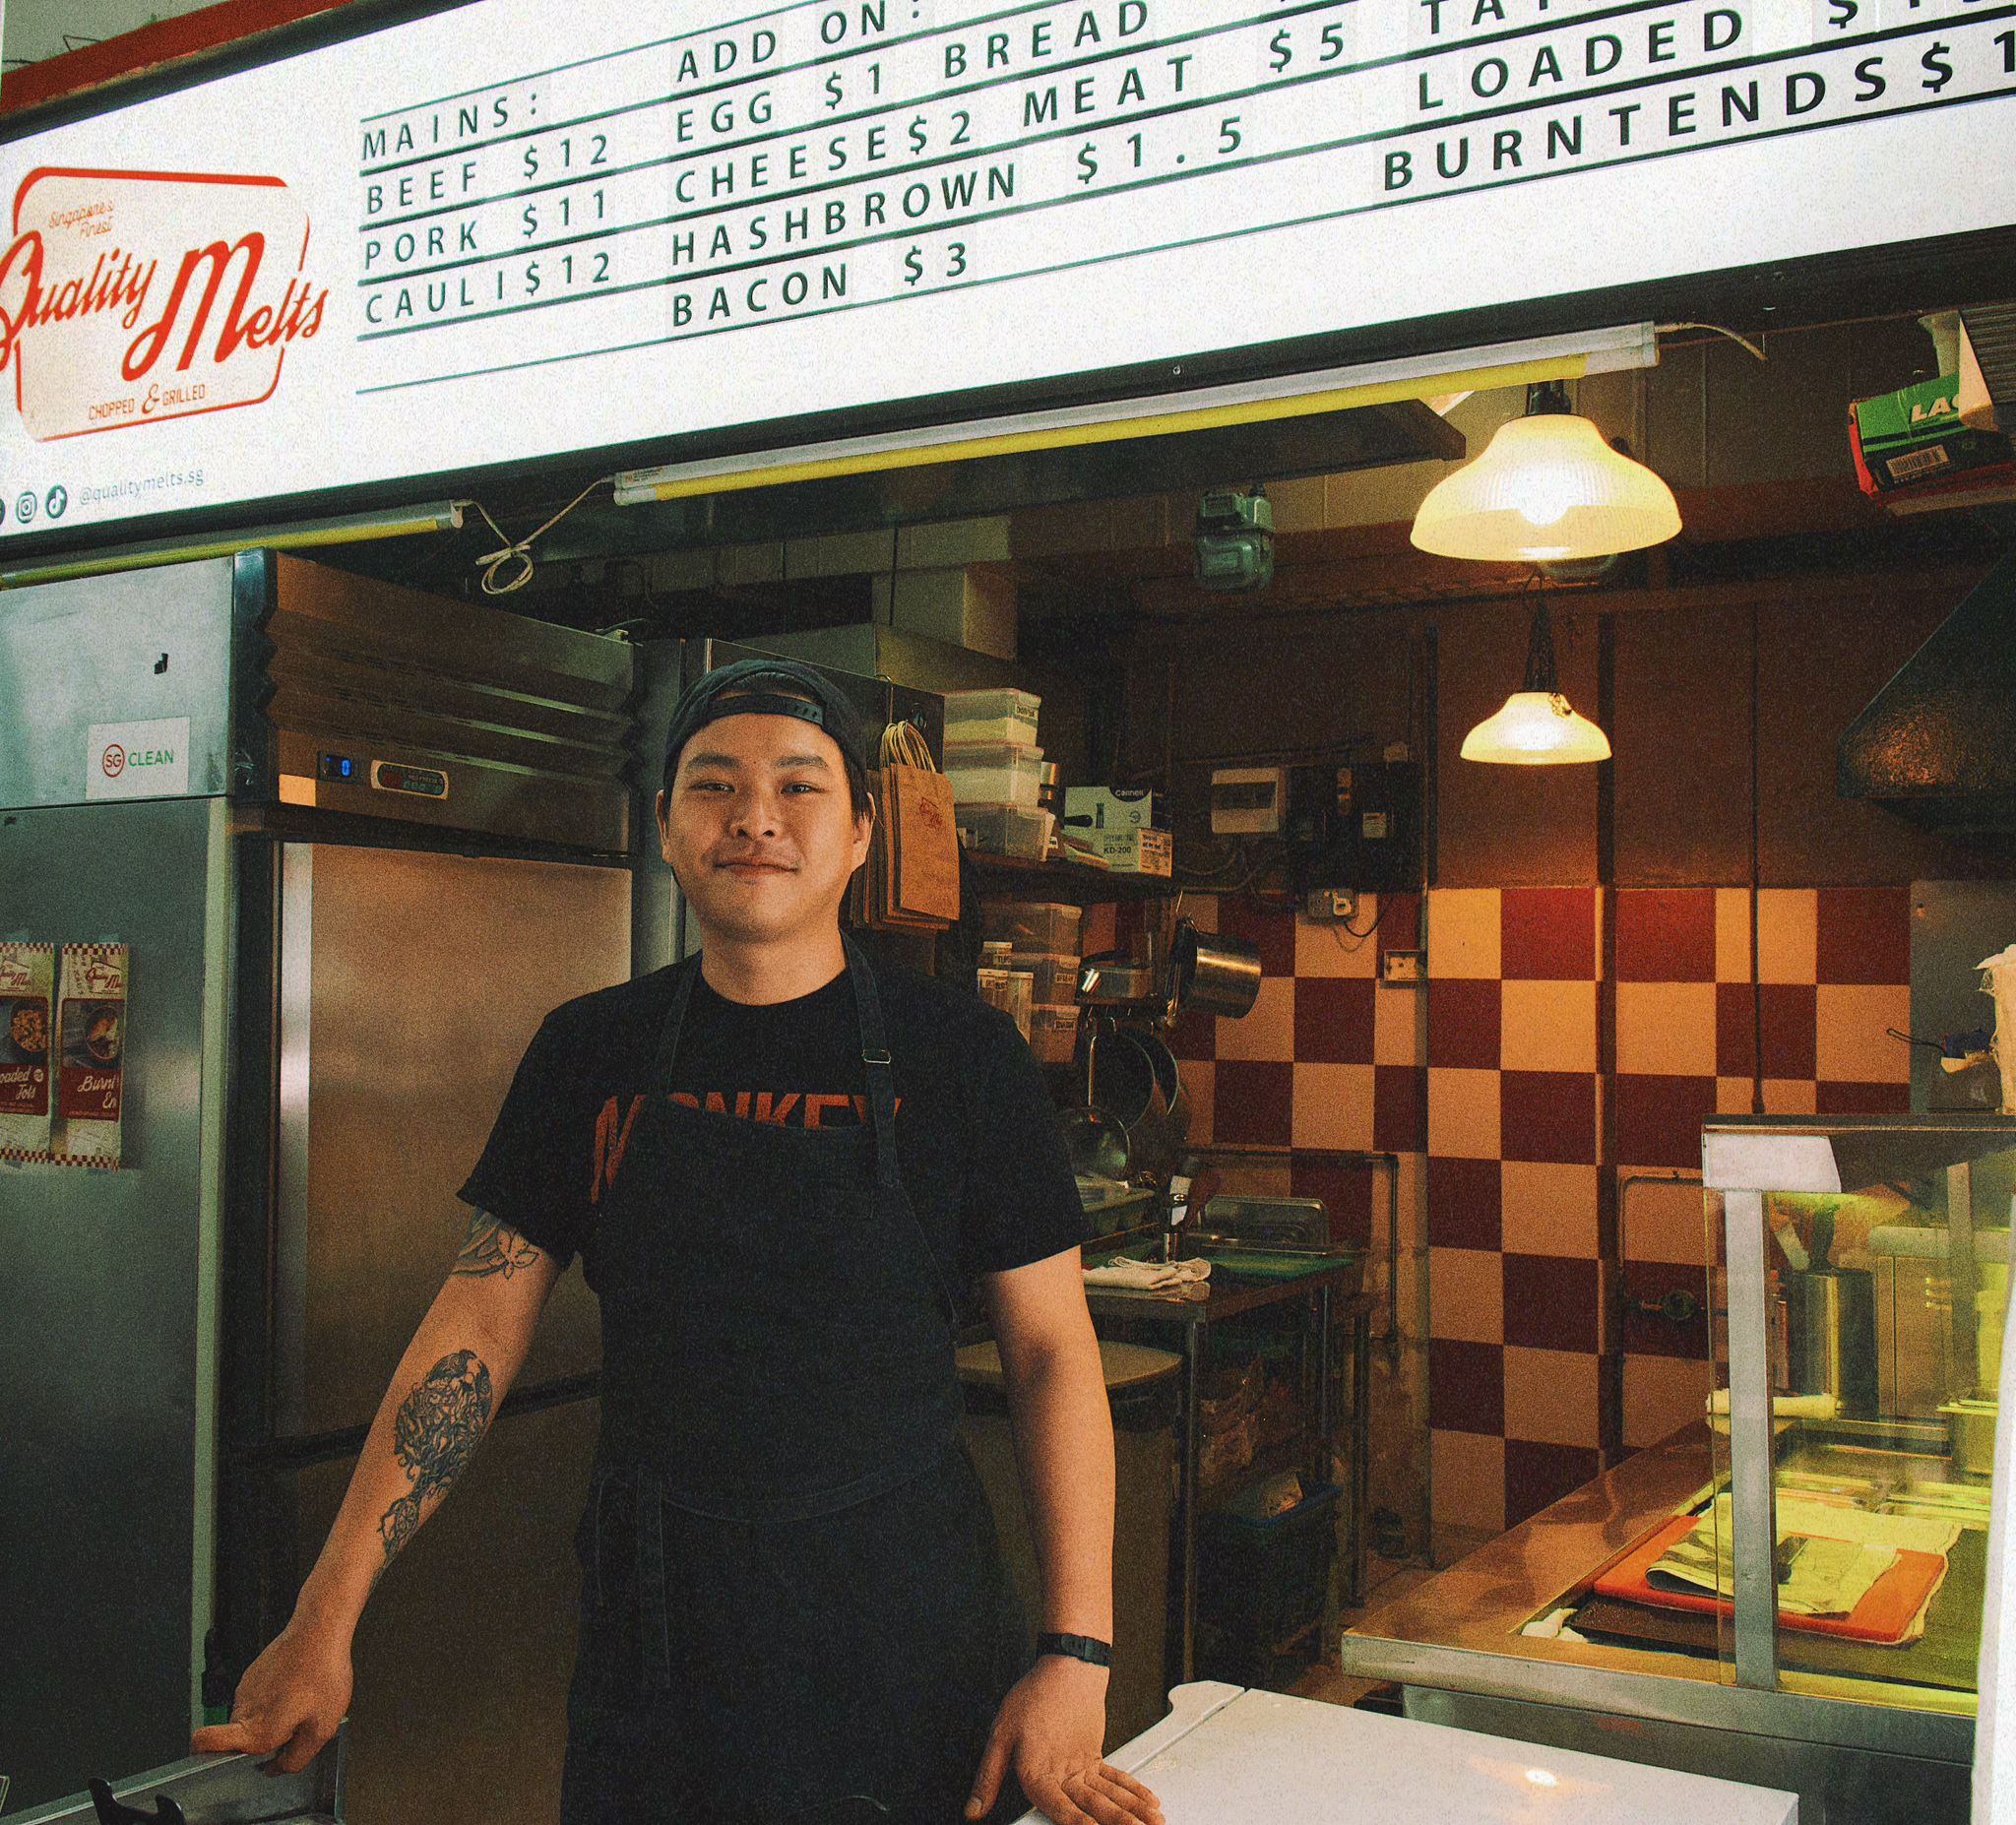 Culture Club: Quality Melts pop up, bringing chopped cheese and quality sodas to Singapore